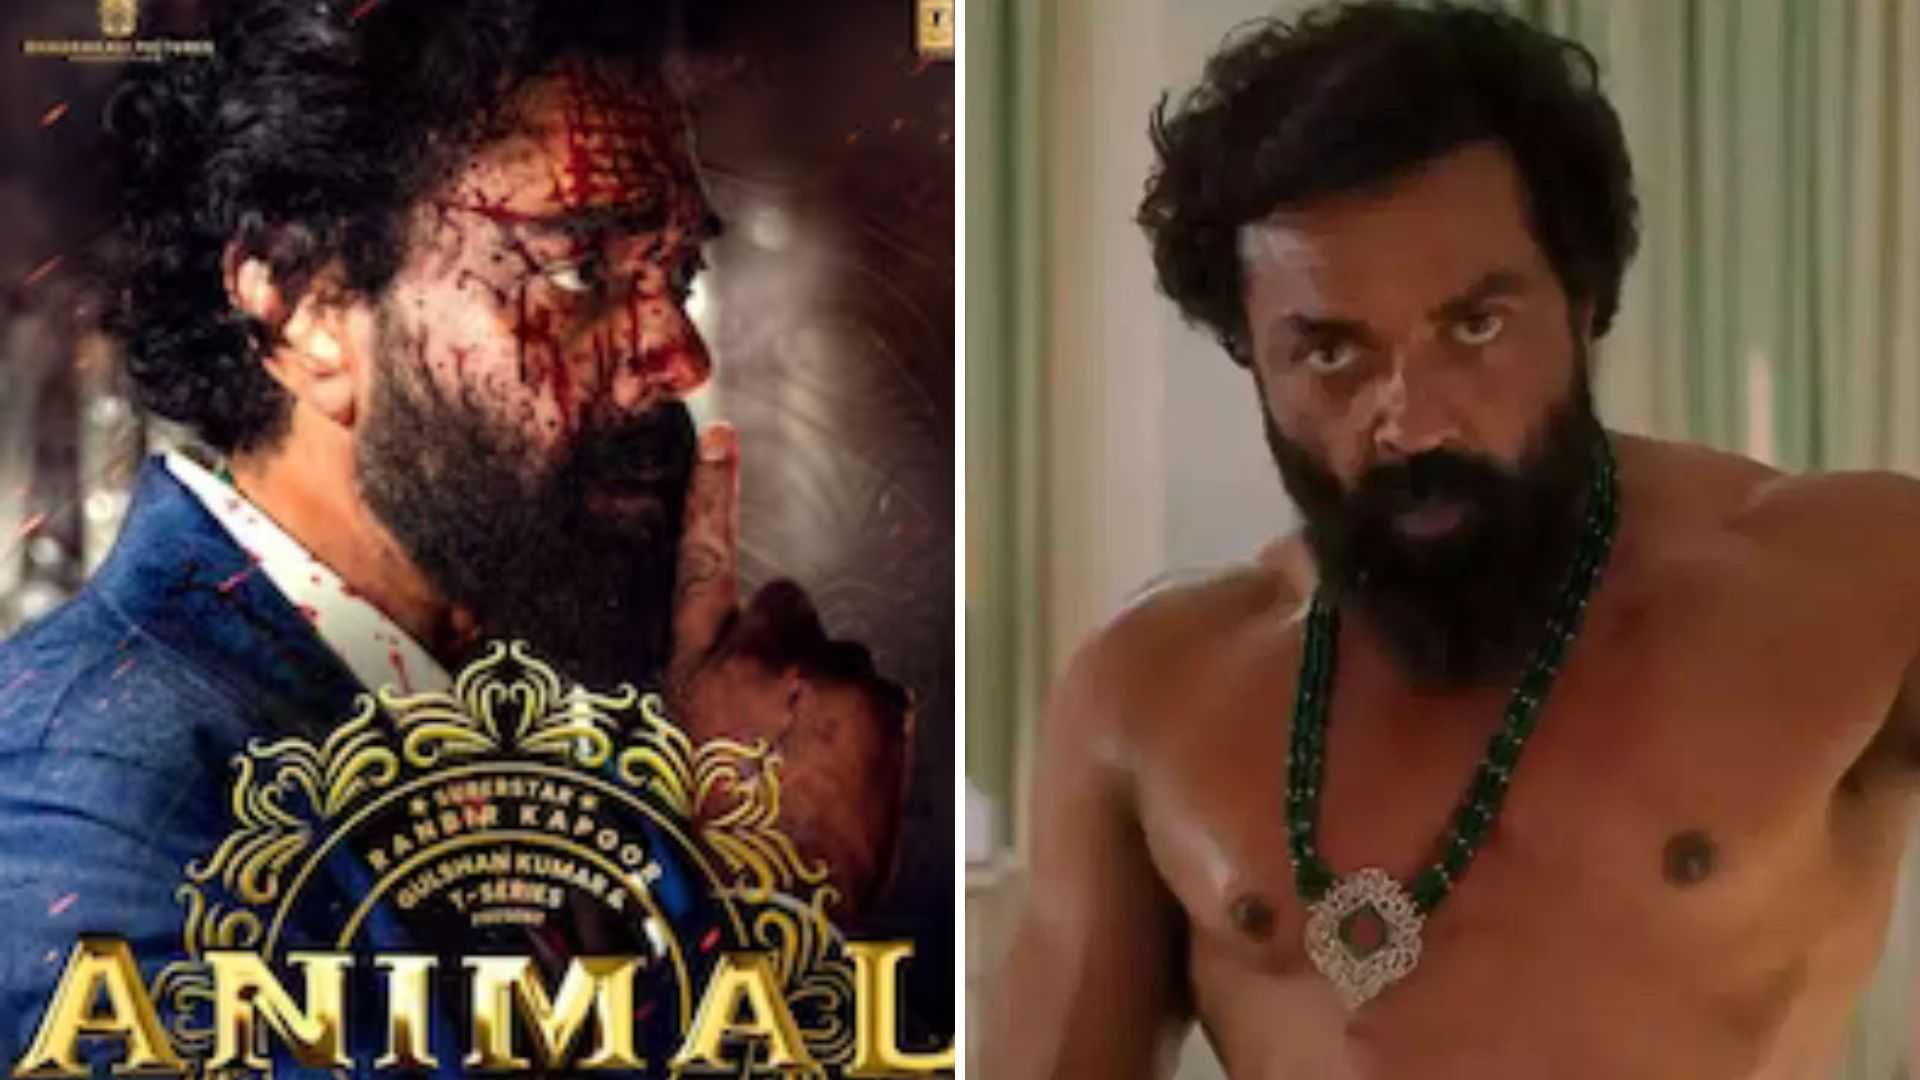 Animal: Fans left disappointed with Bobby Deol's screentime in Ranbir Kapoor starrer, say 'He is just wasted'